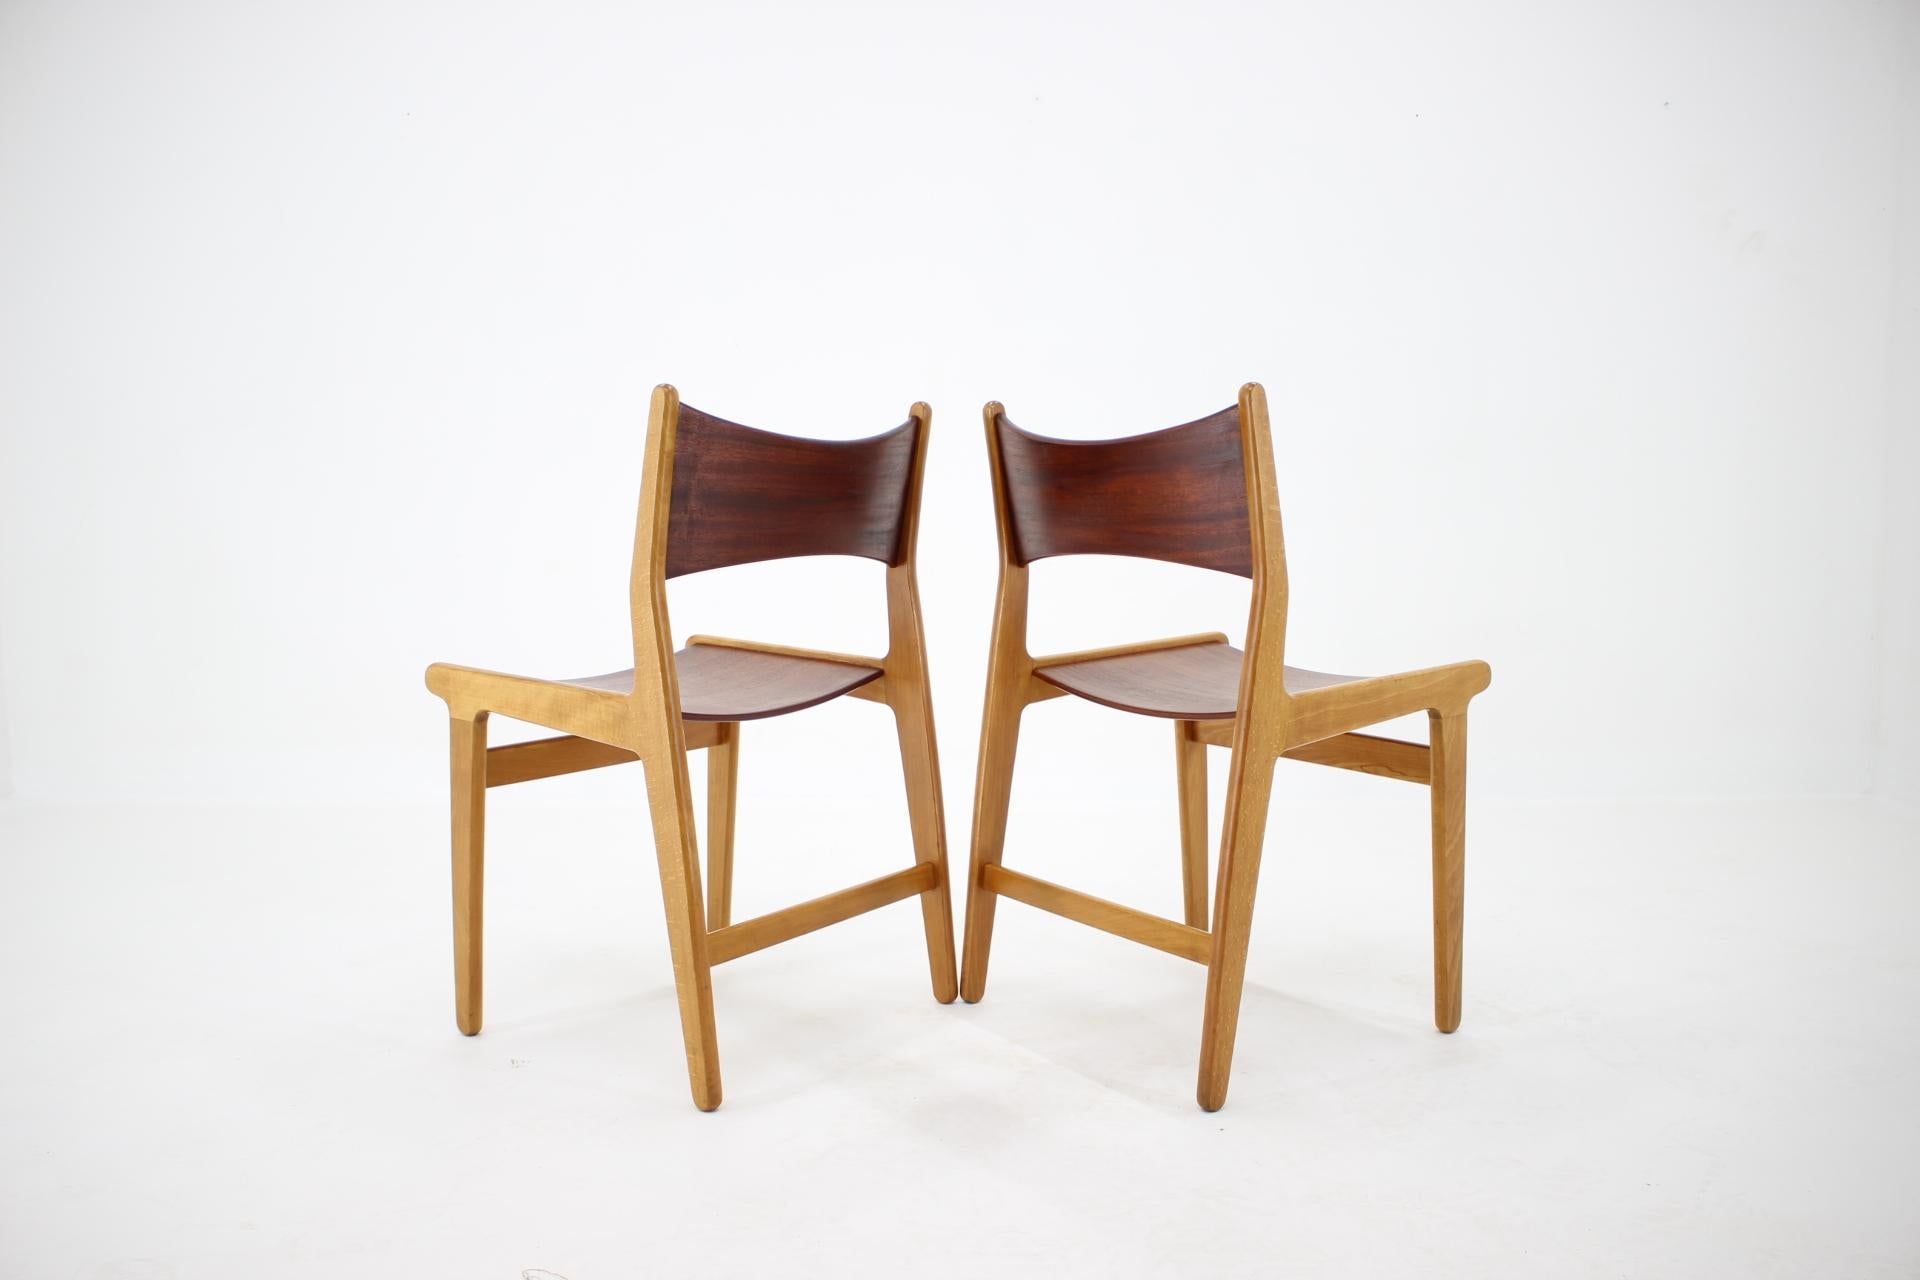 1960s Set of 4 Teak and Beech Dining Chairs, Denmark 1